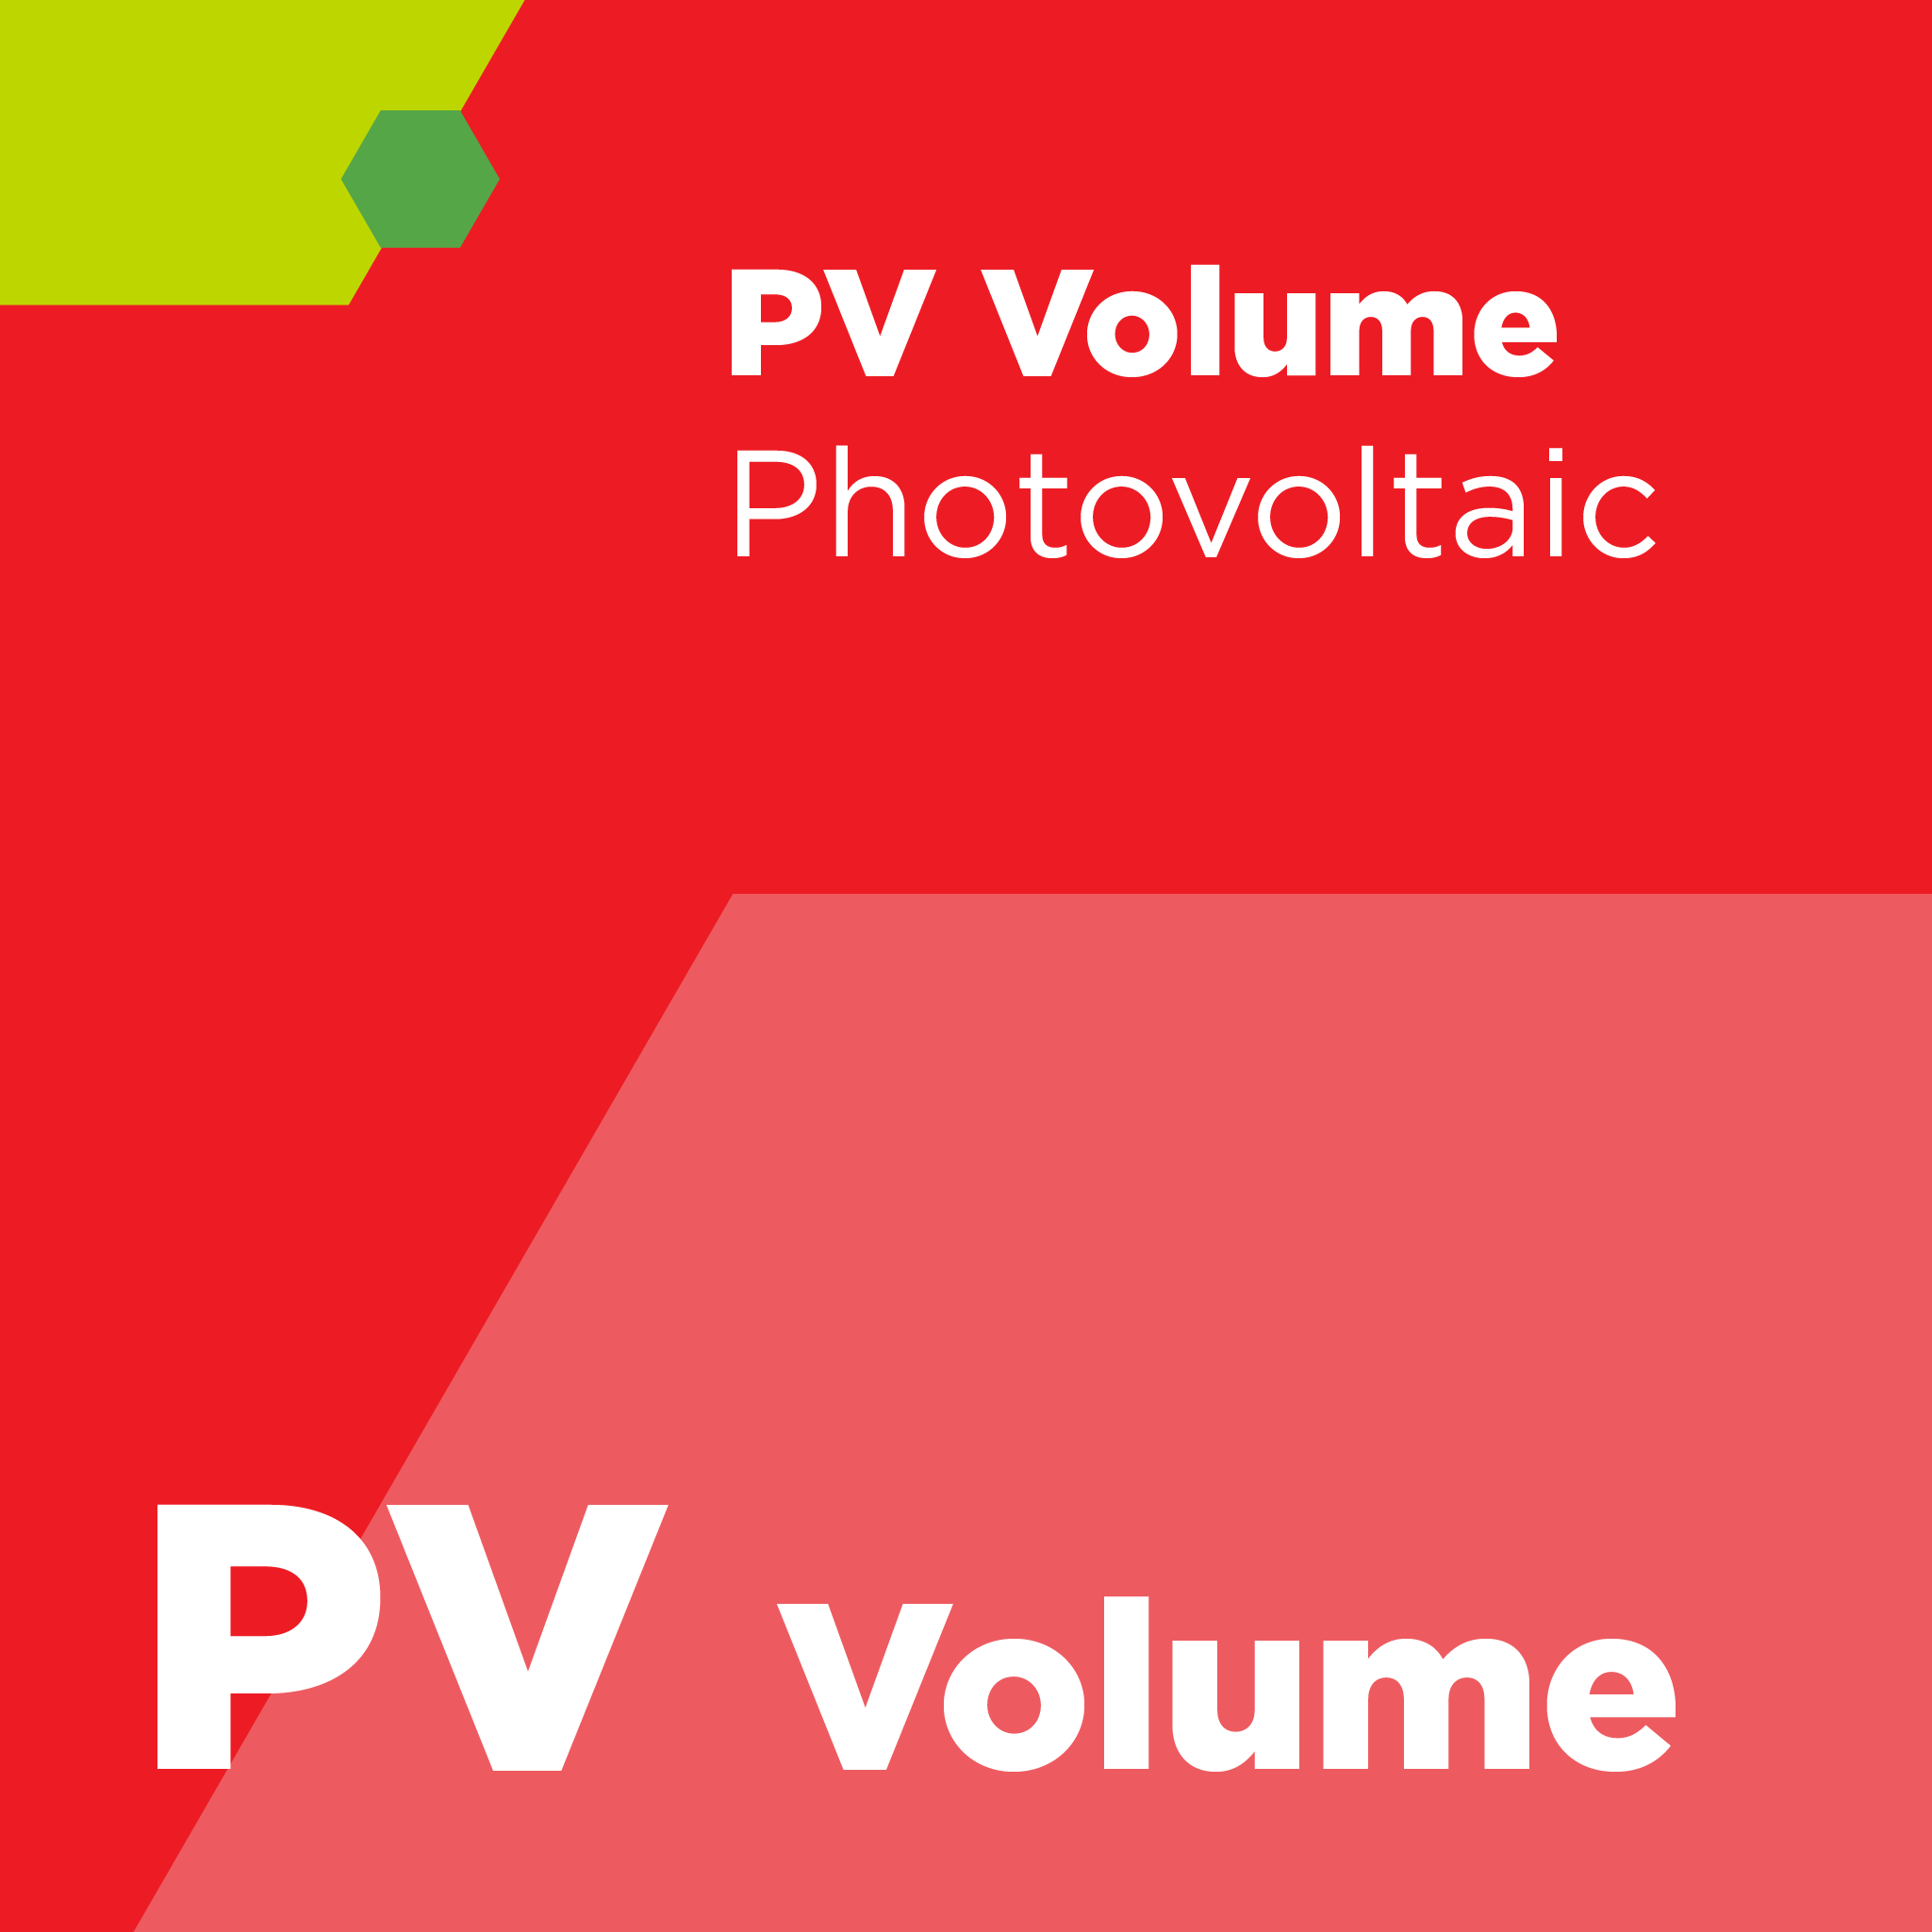 PV04500 - SEMI PV45 - Test Method for the Content of Vinyl Acetate in Ethylene-Vinyl Acetate Applied in Photovoltaic Modules Using Thermal Gravimetric Analysis